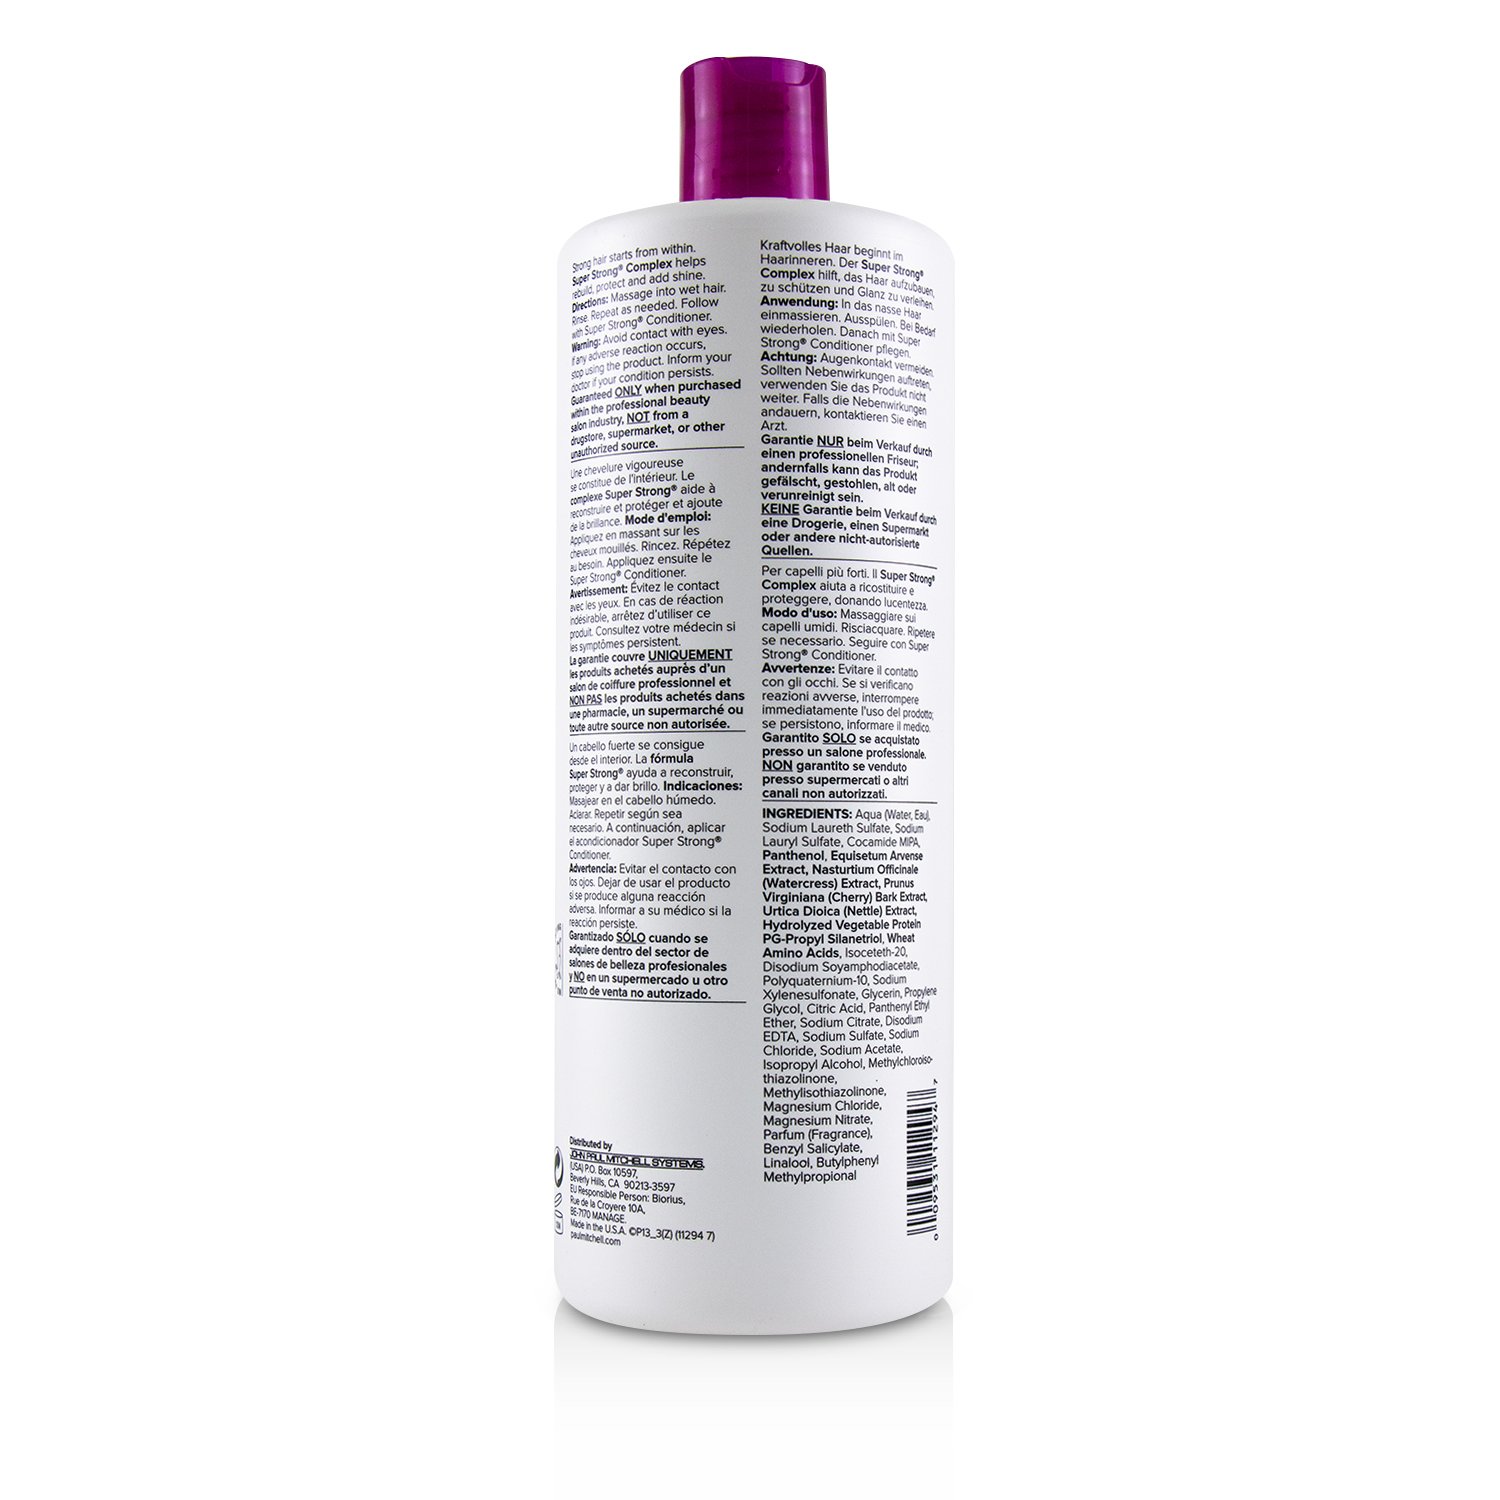  Paul Mitchell Super Strong Shampoo, Strengthens + Rebuilds, For  Damaged Hair, 33.8 fl. oz. : Paul Mitchell: Beauty & Personal Care